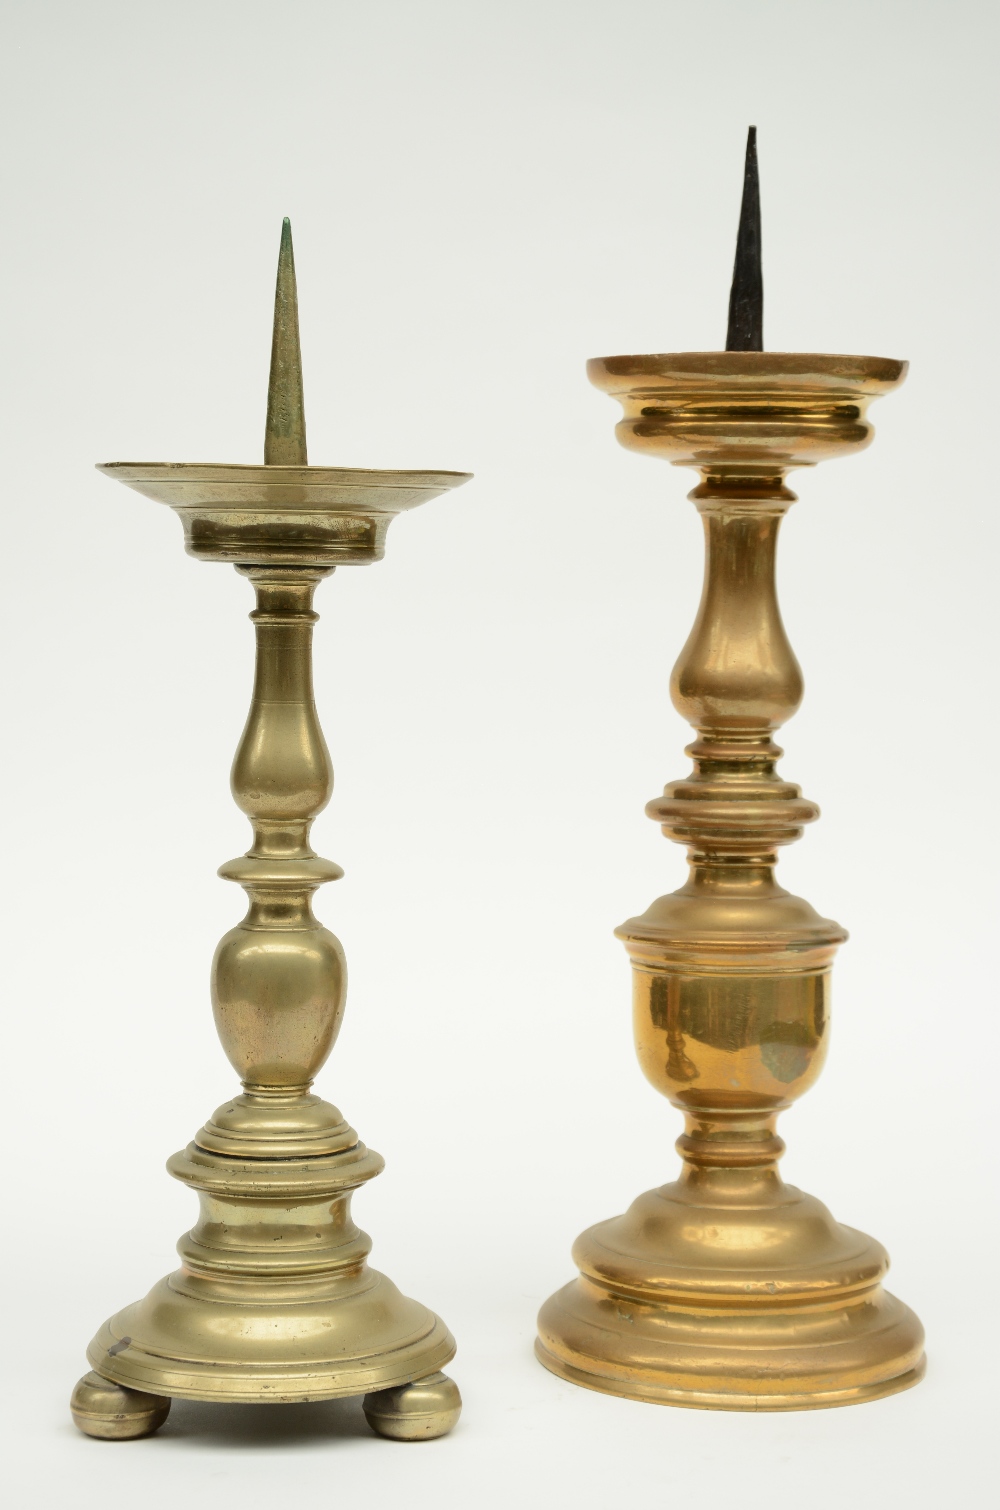 Two 17thC Low Countries pricket candlesticks, H 47,5 - 52,5 cm (some restoration)